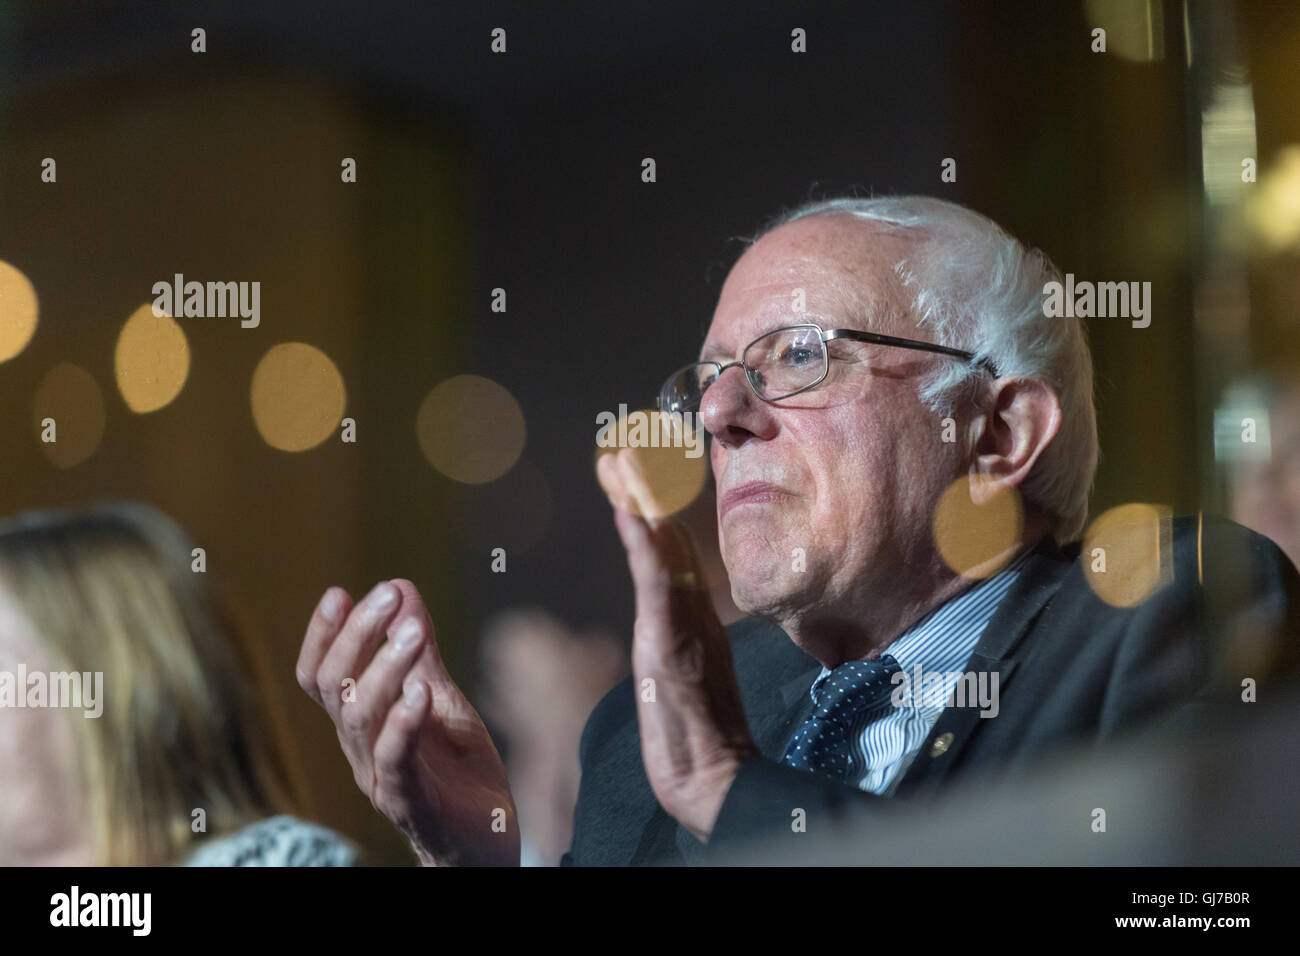 Senator Bernie Sanders watches the roll call vote during the 2nd day of the Democratic National Convention at the Wells Fargo Center July 26, 2016 in Philadelphia, Pennsylvania. Stock Photo